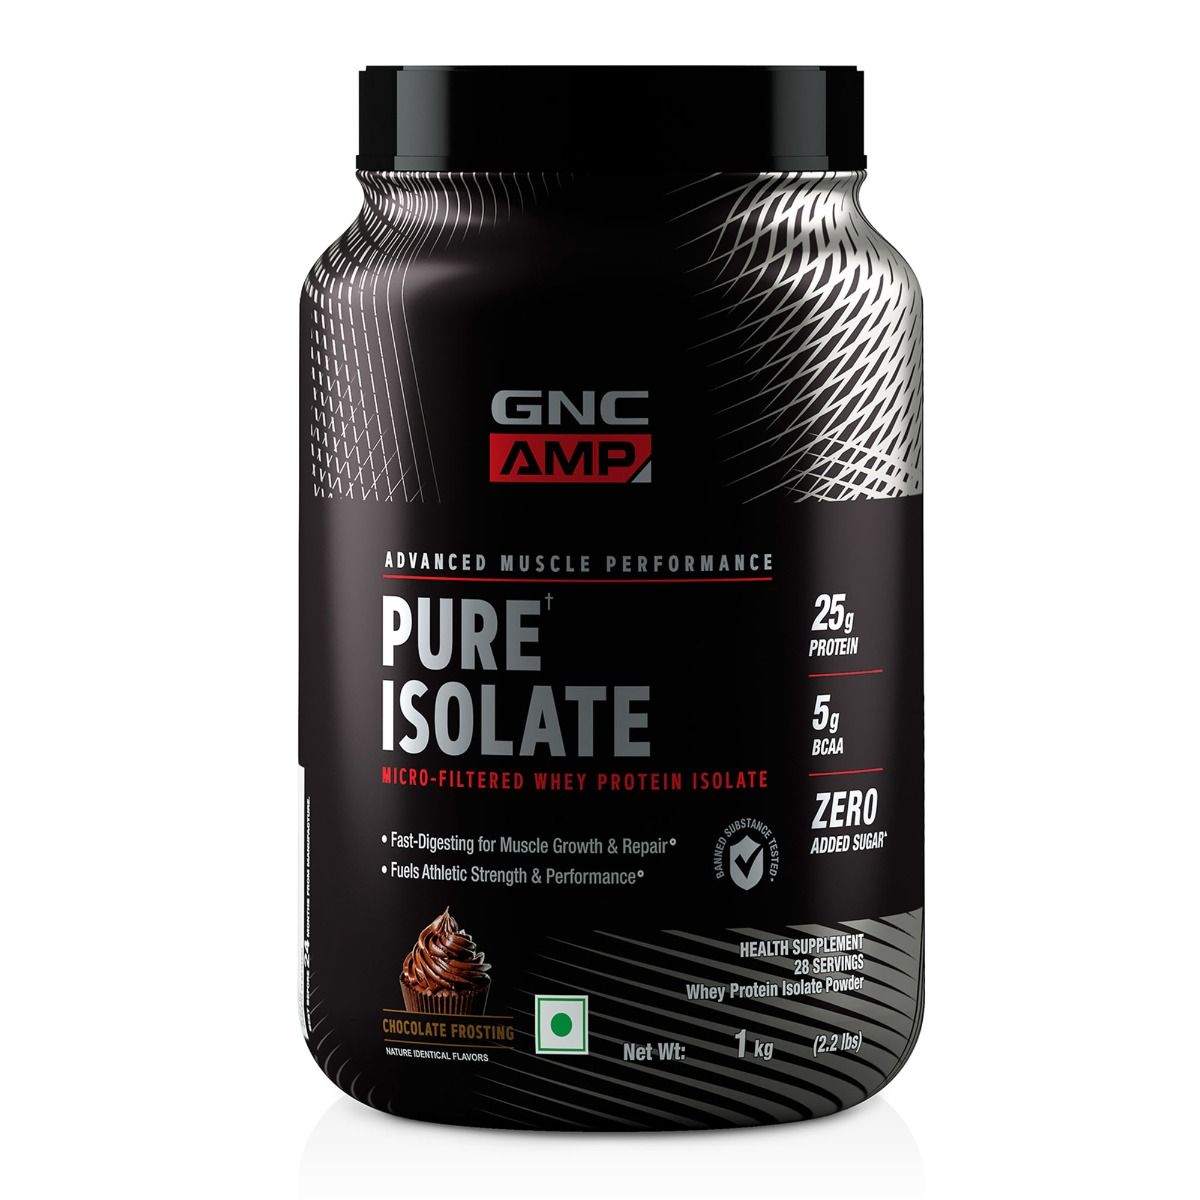 GNC AMP Pure Isolate Whey Protein Chocolate Frosting Flavoured Powder, 1 kg, Pack of 1 